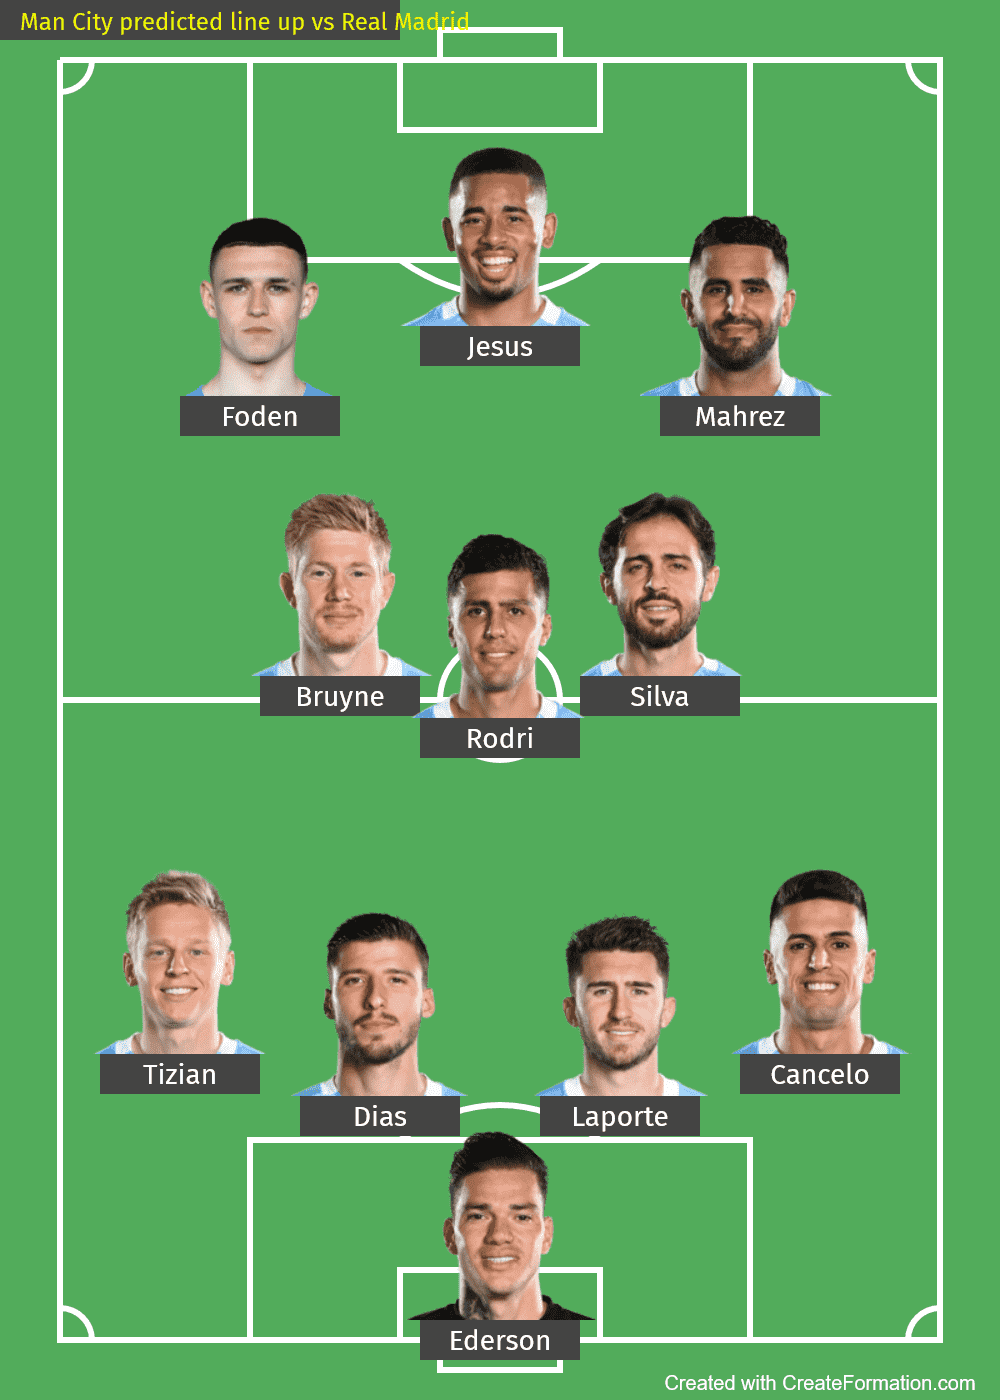 Man City predicted line up vs Real Madrid-2nd leg-UCL